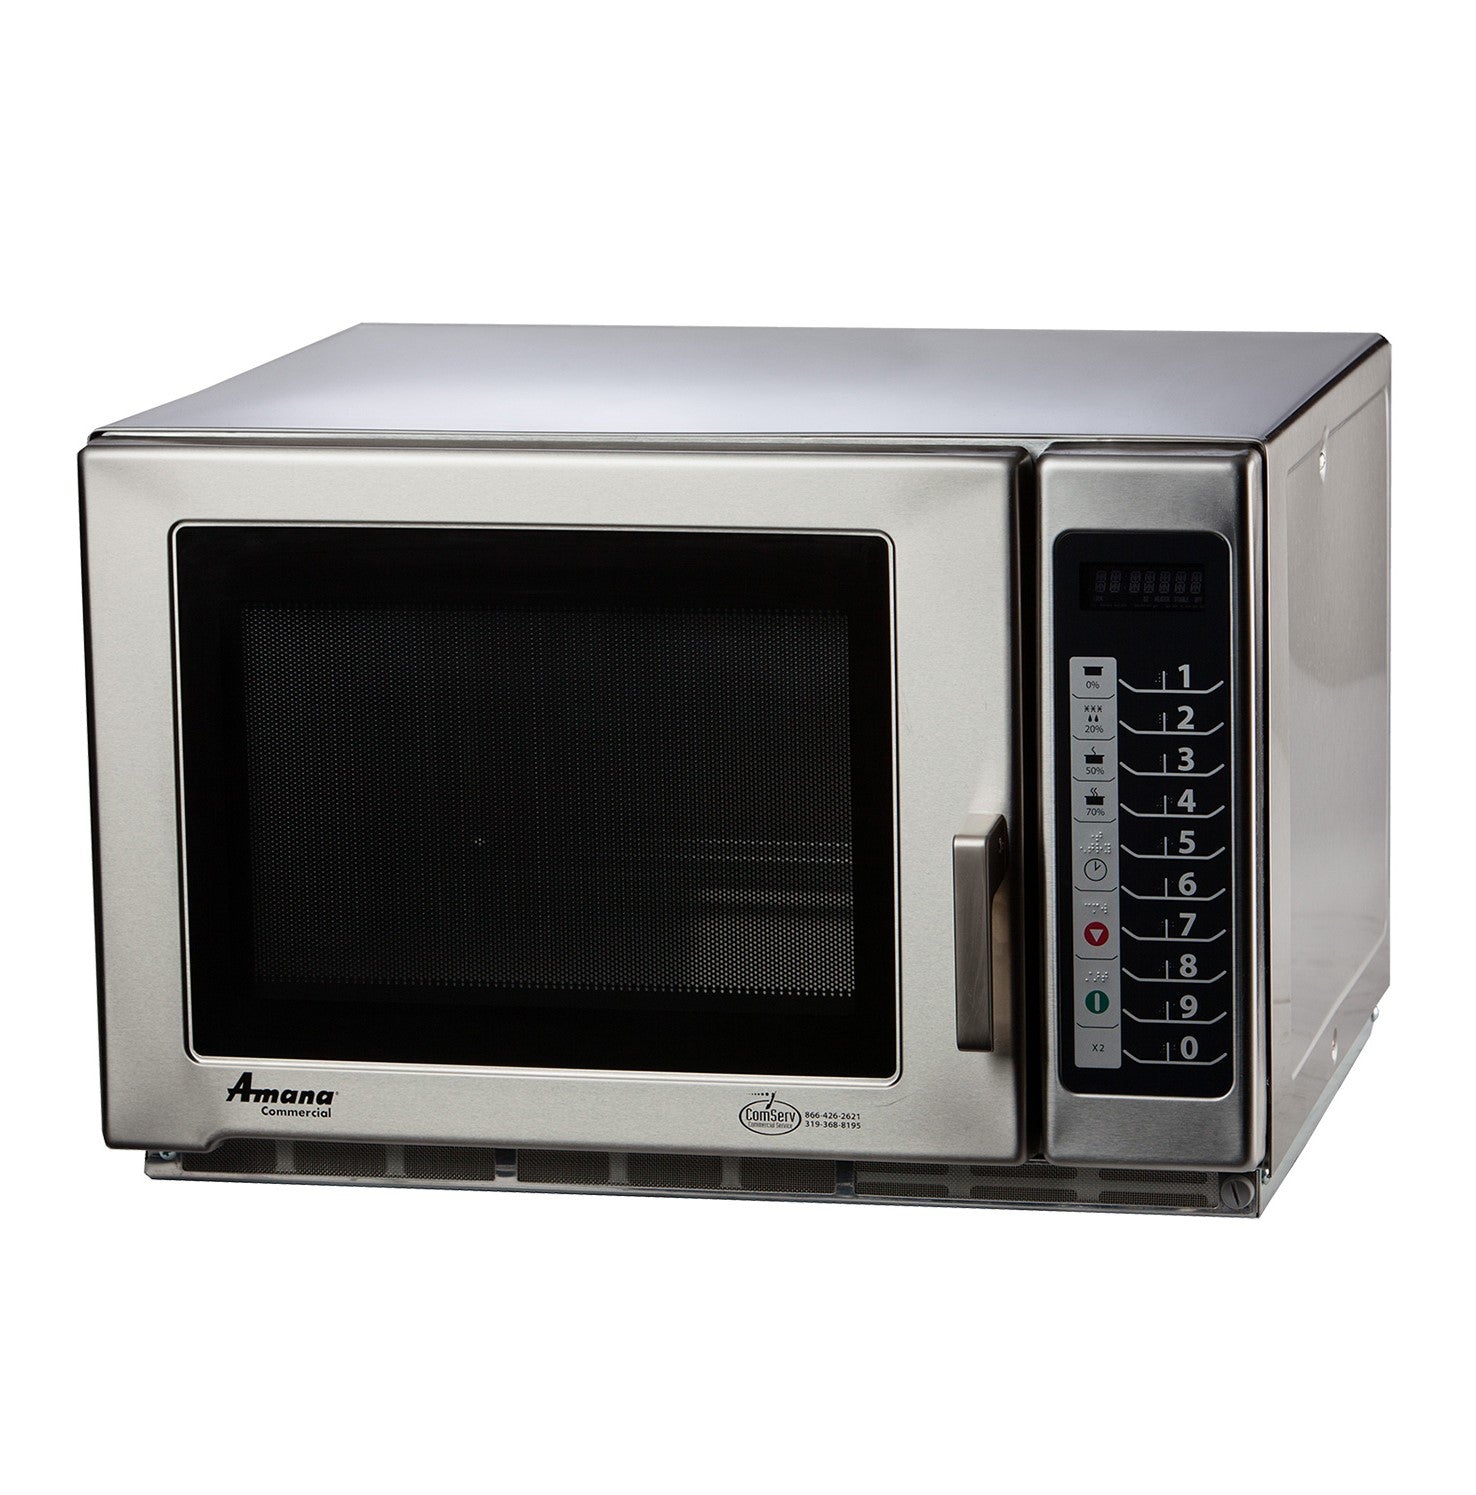 Amana RFS18TS Medium Duty Commercial Microwave Oven w/ Braille Touch Pad, 1800W, 208-240v